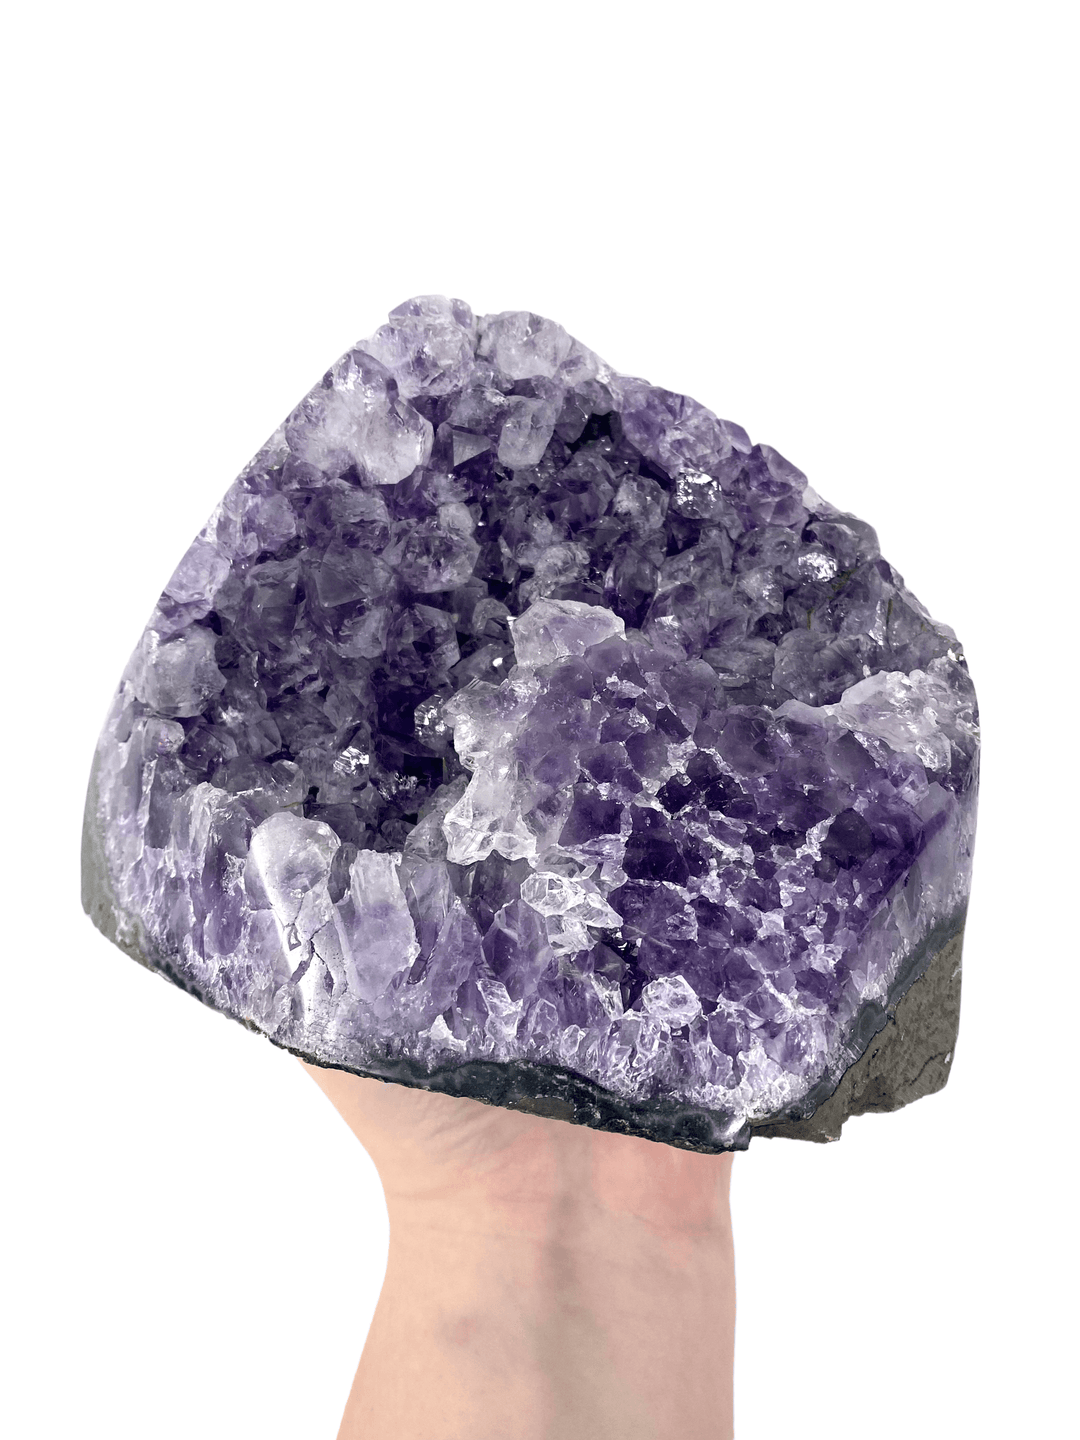 Amethyst Free Standing Crystal With Polished Edges - Esme and Elodie